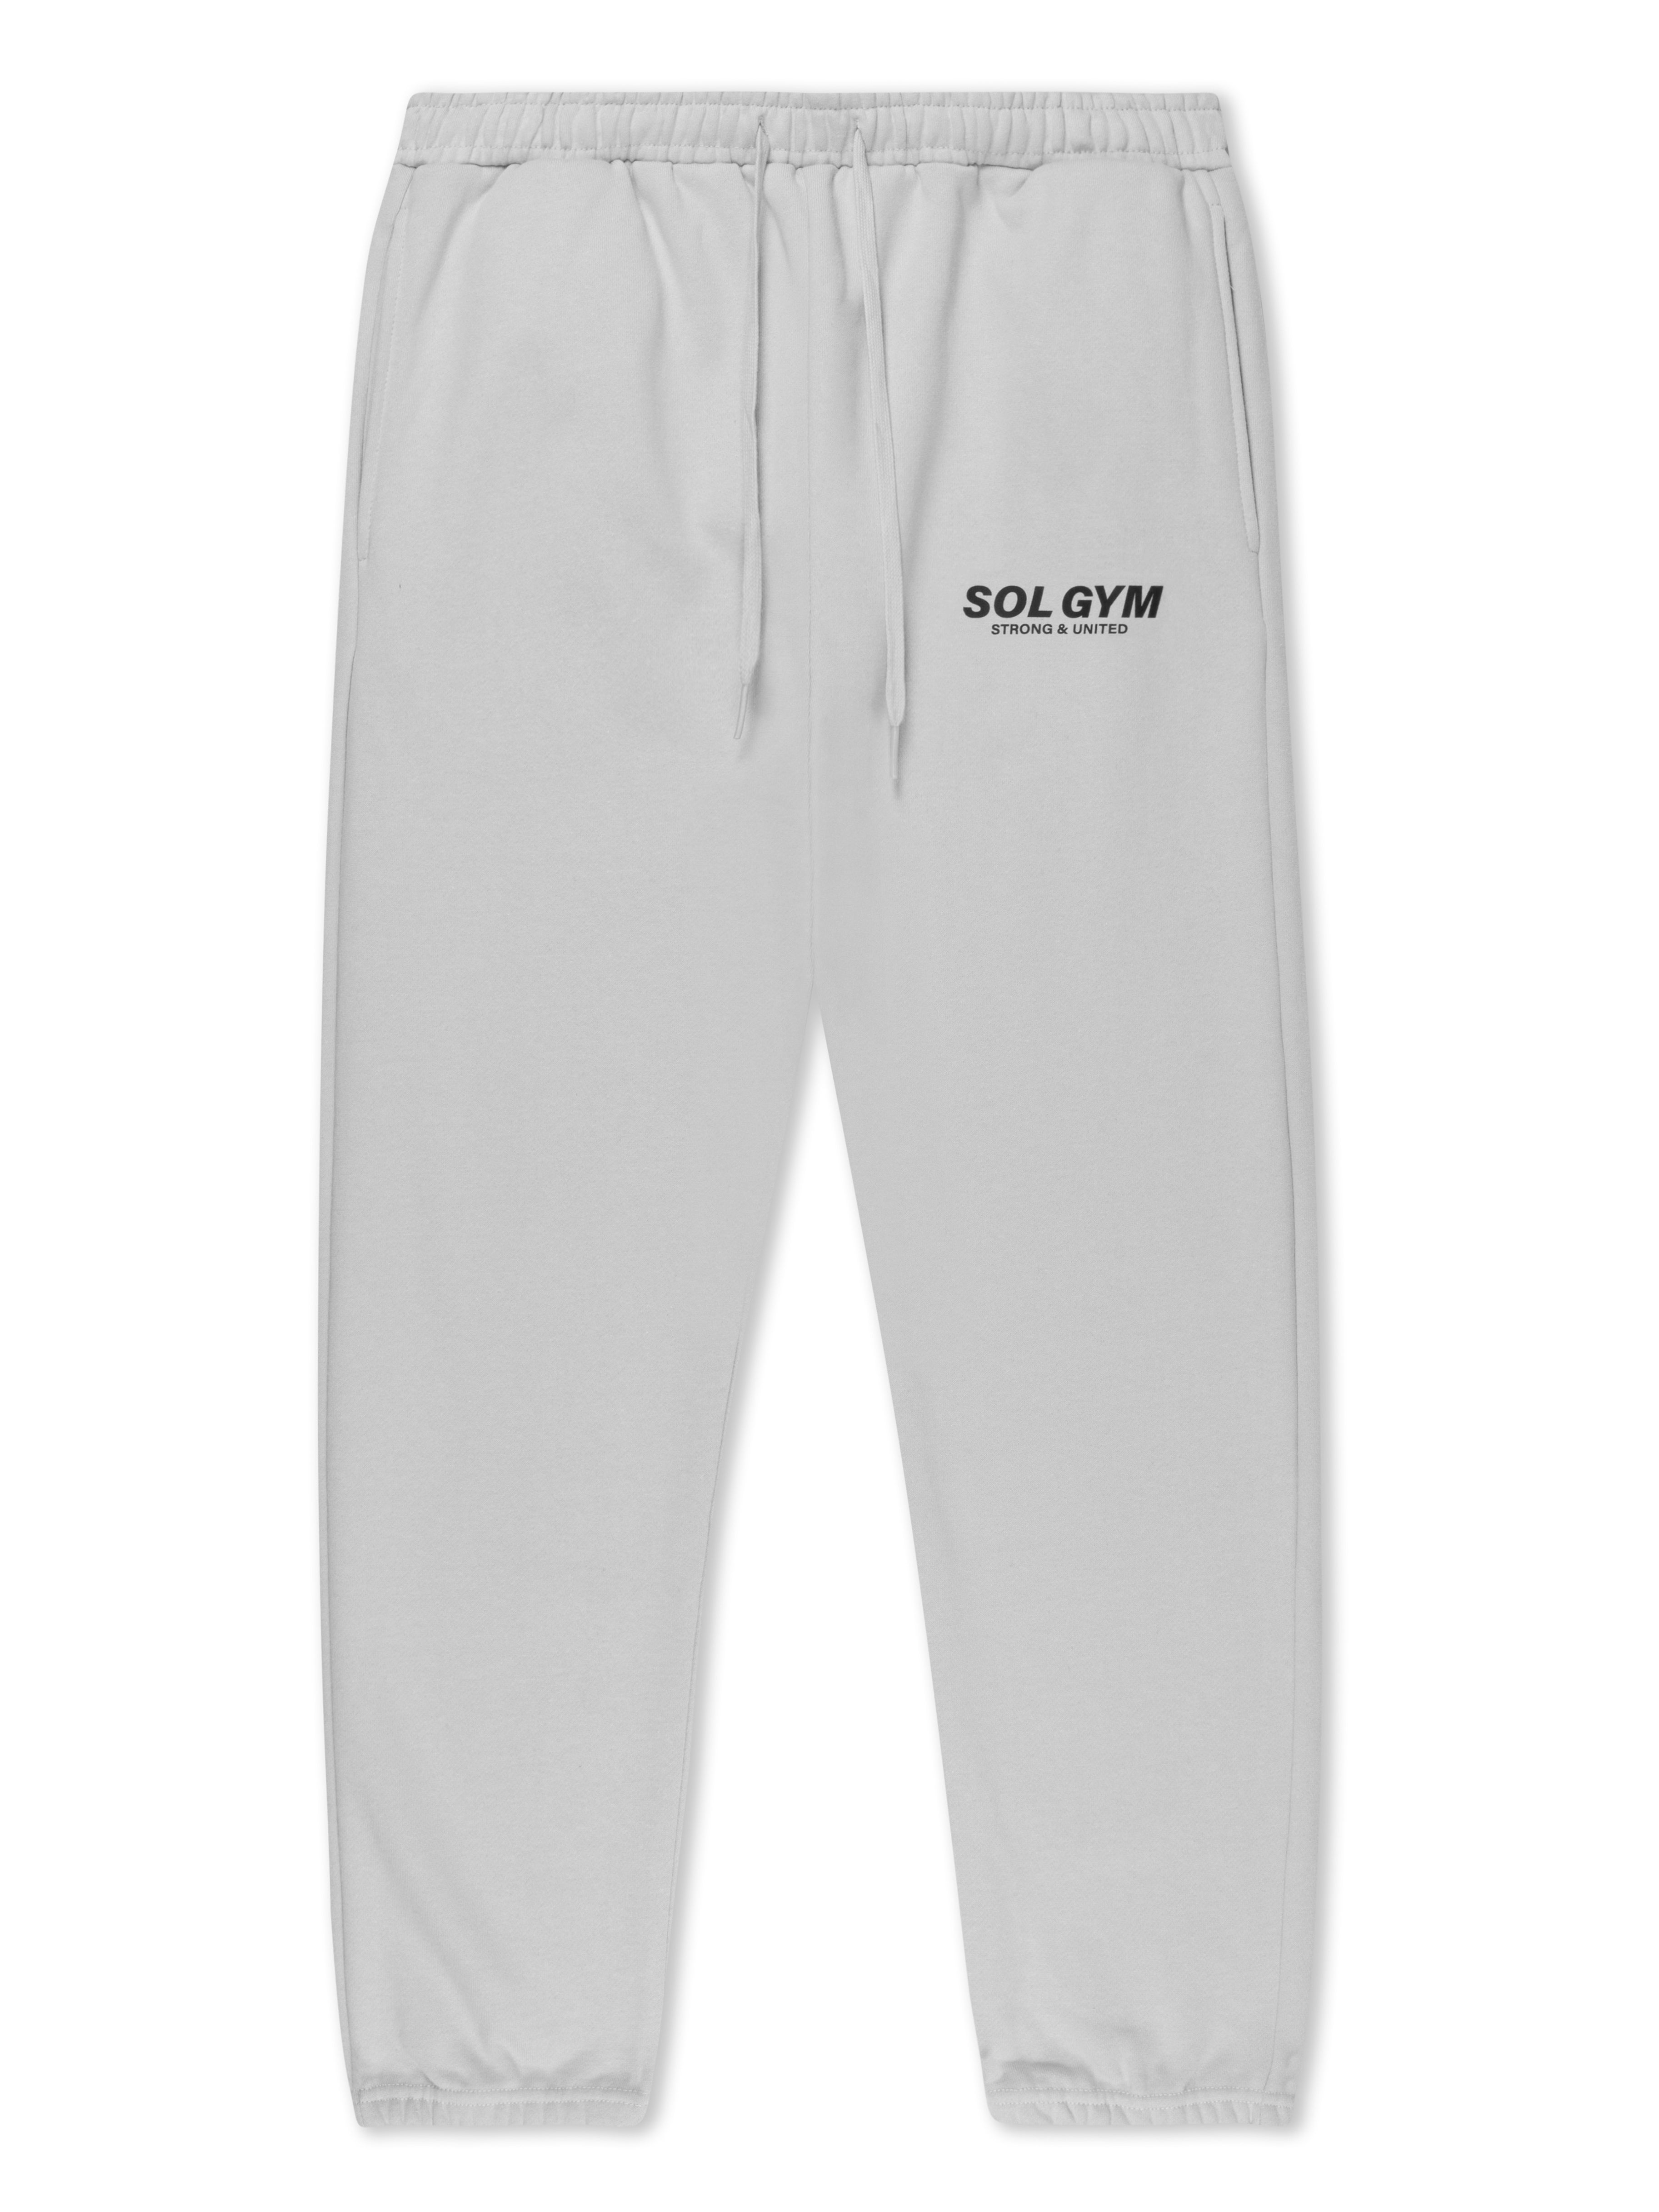 Sol Gym Cotton Tapered Sweatpants, Heather Grey